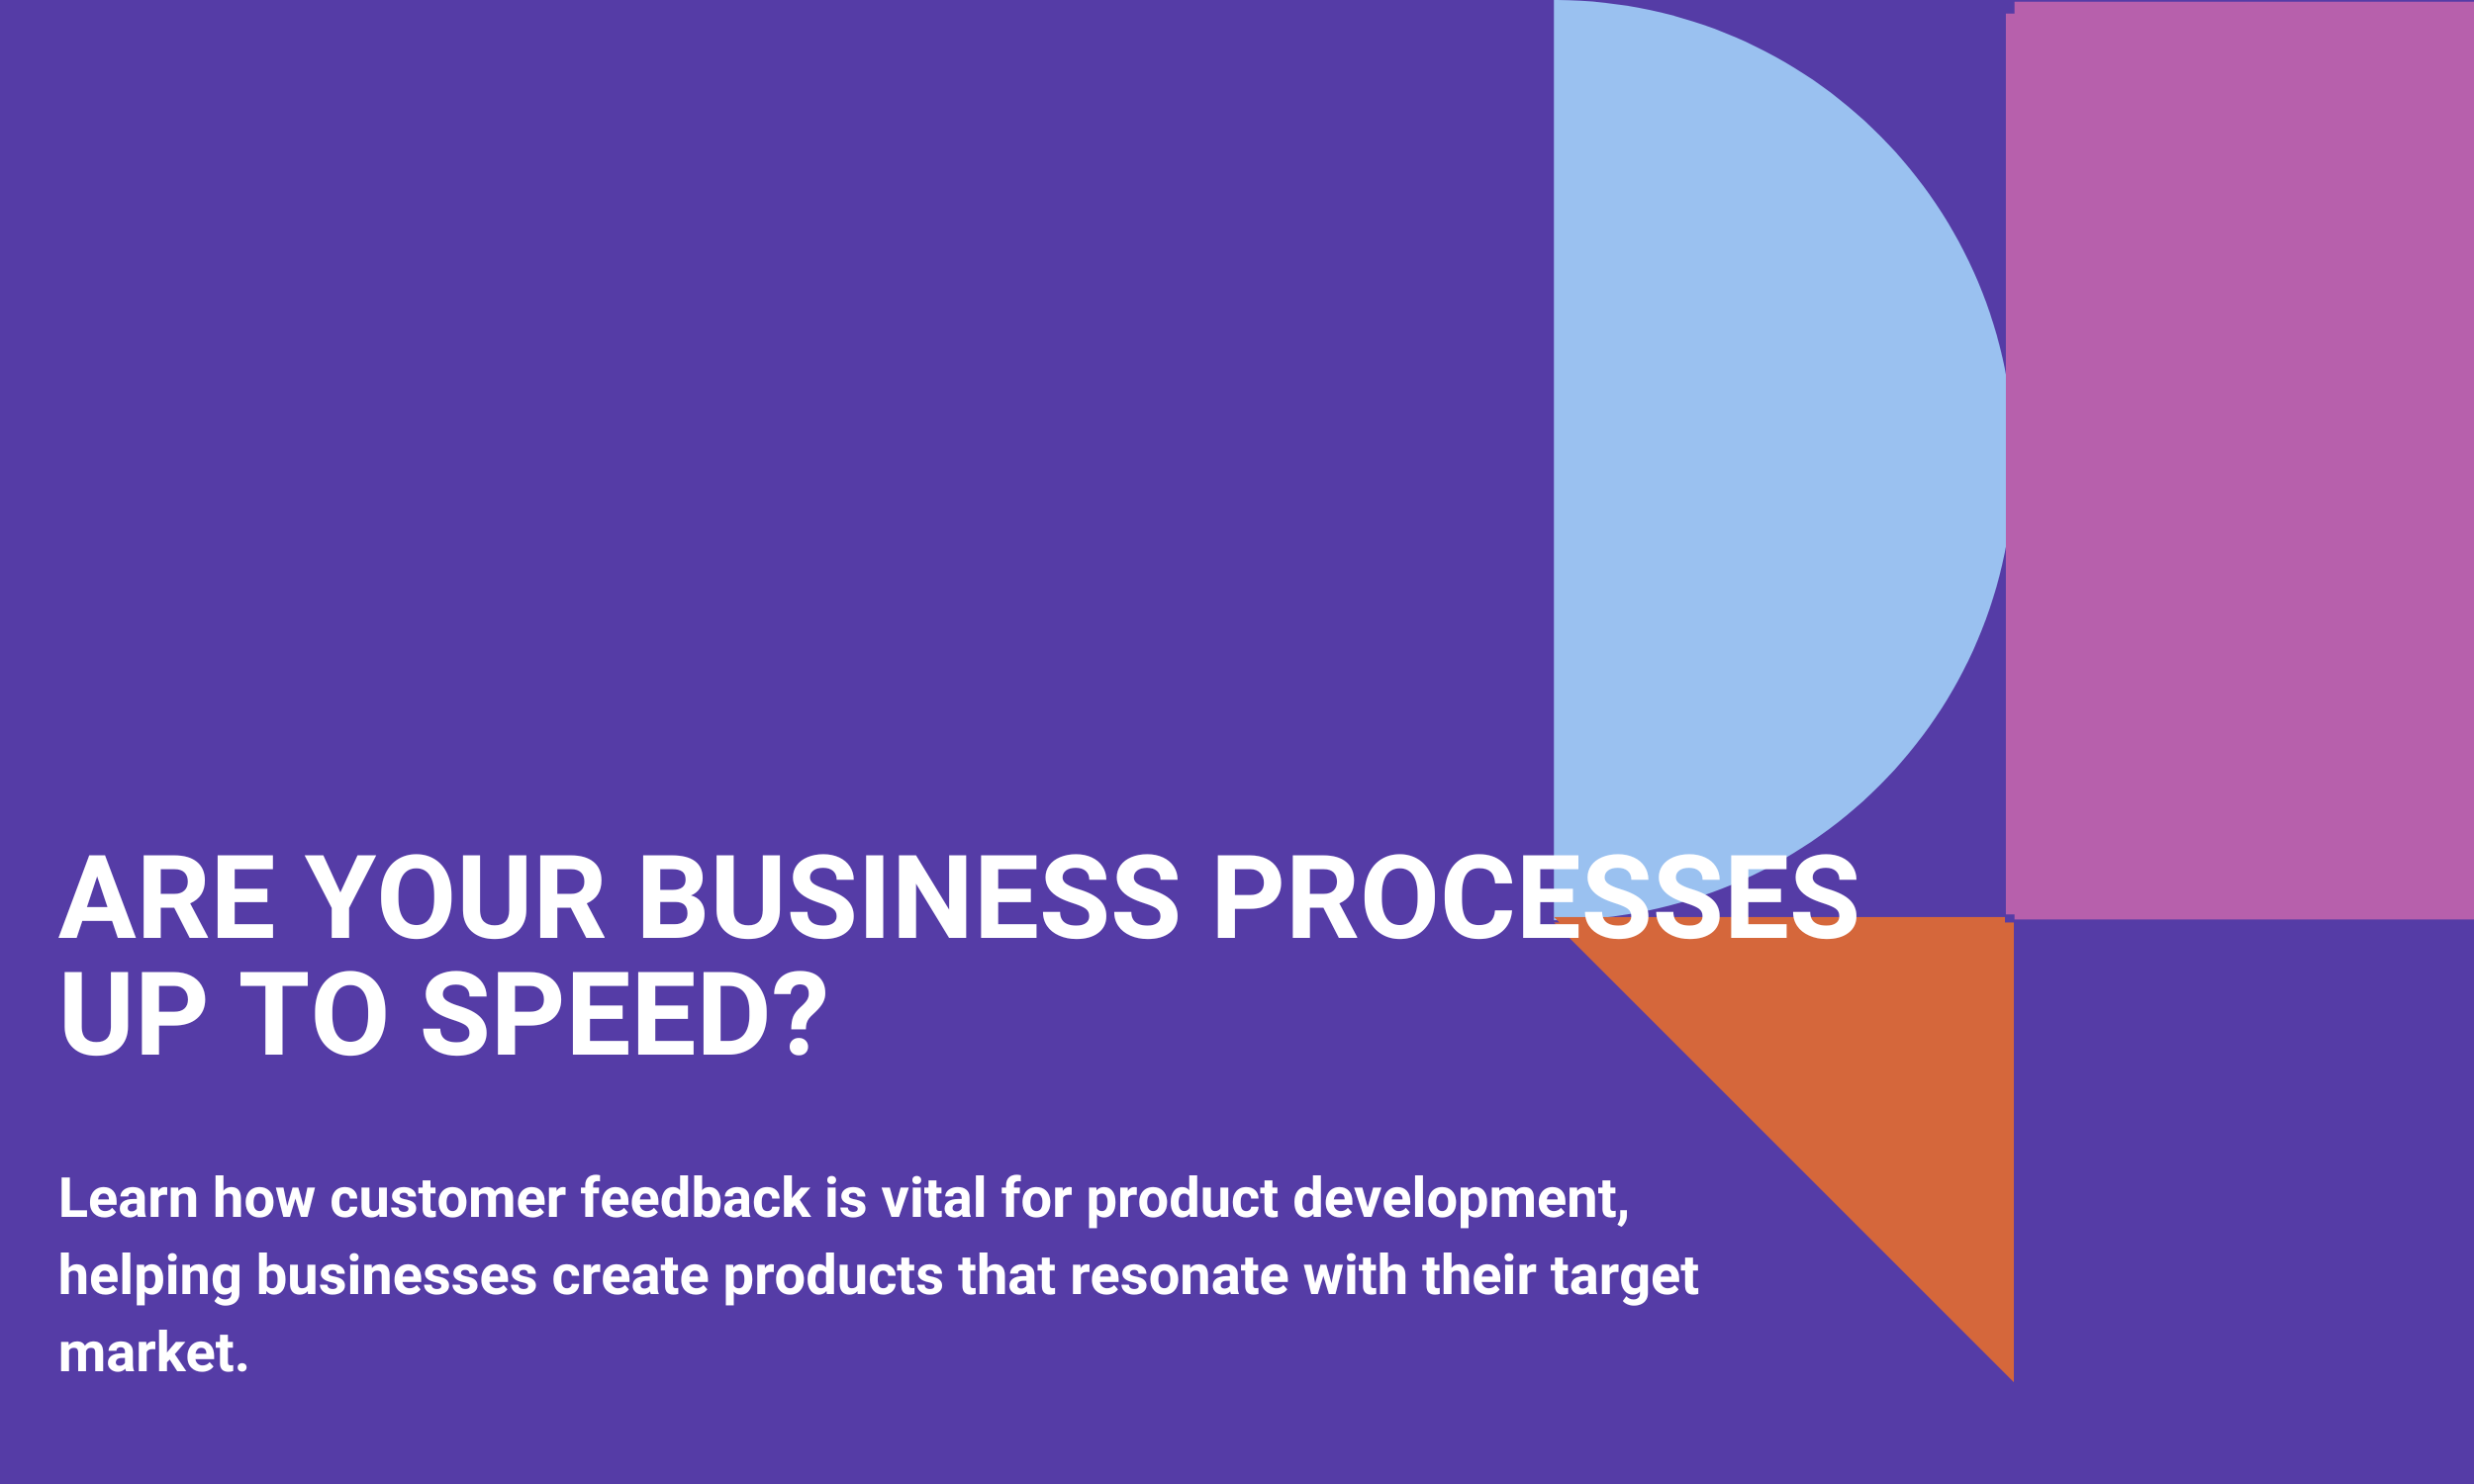 Are Your Business Processes up to Speed?